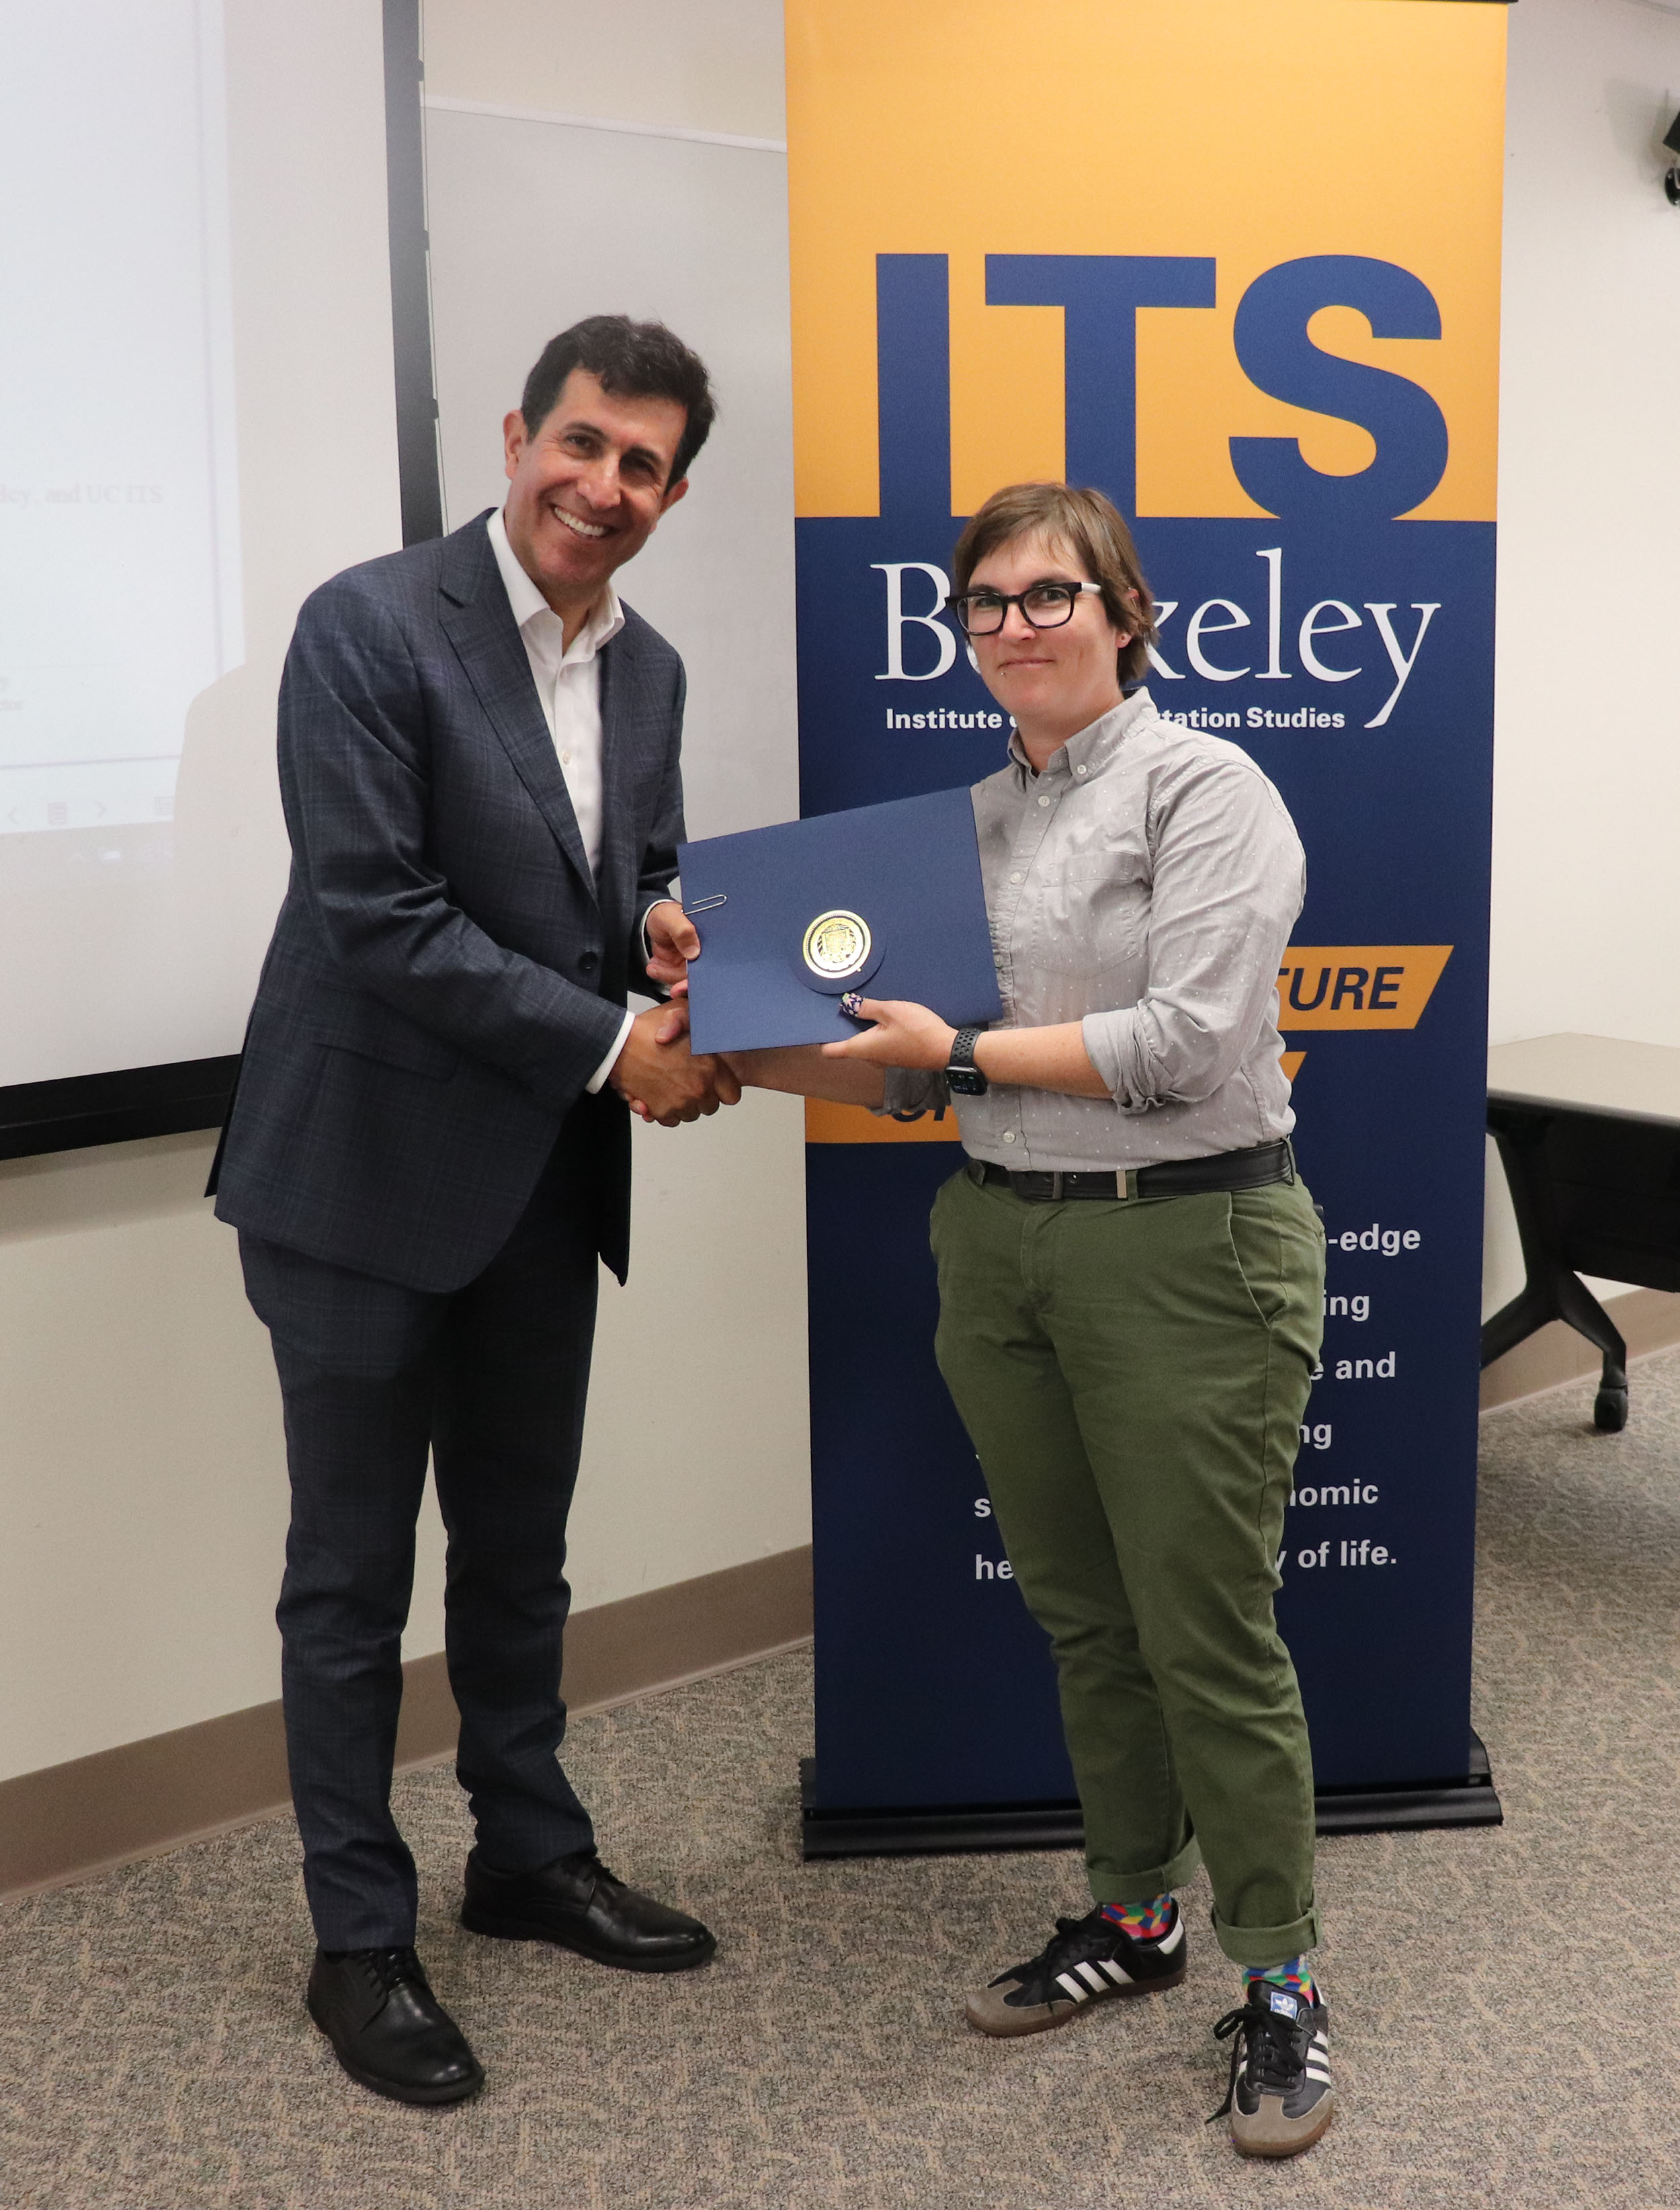 ITS Staff of the Year: ITS Library Director Kendra Levine: For outstanding support to ITS students, faculty, and staff, and unwavering commitment to the educational and research mission of the ITS Berkeley, and UC ITS.